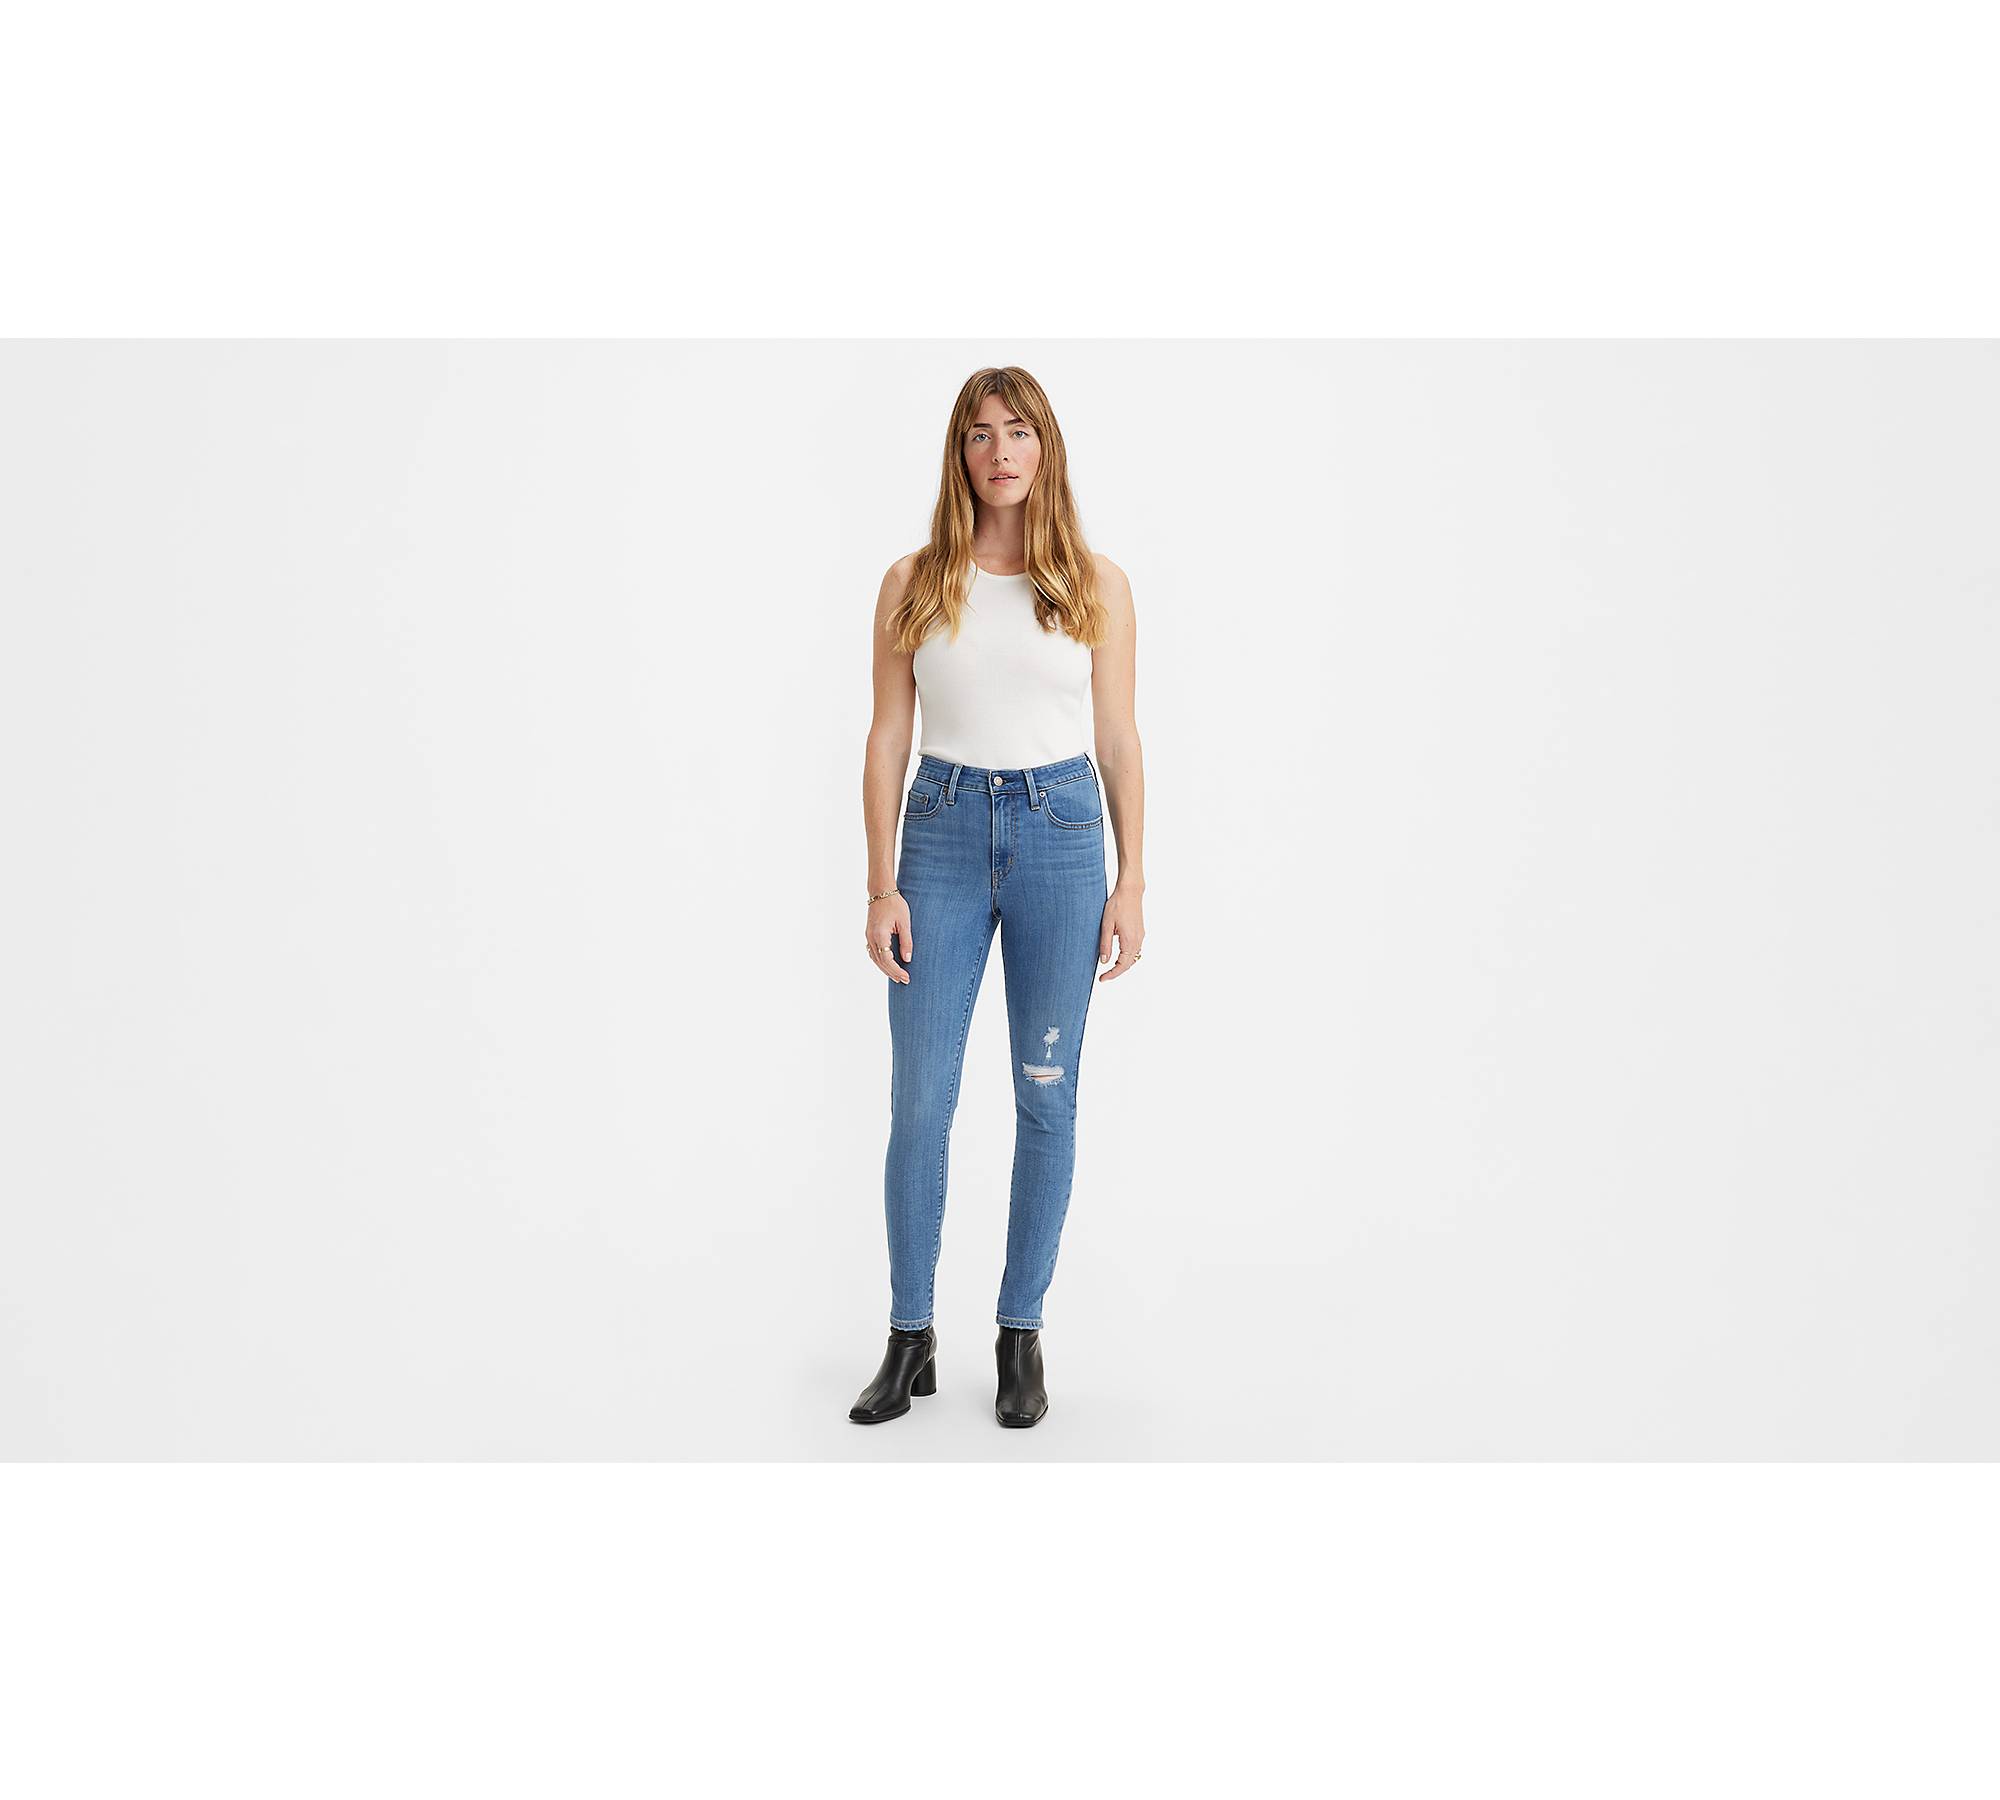 Levi's Mid Rise Skinny Jeans Women's Size 14 - beyond exchange